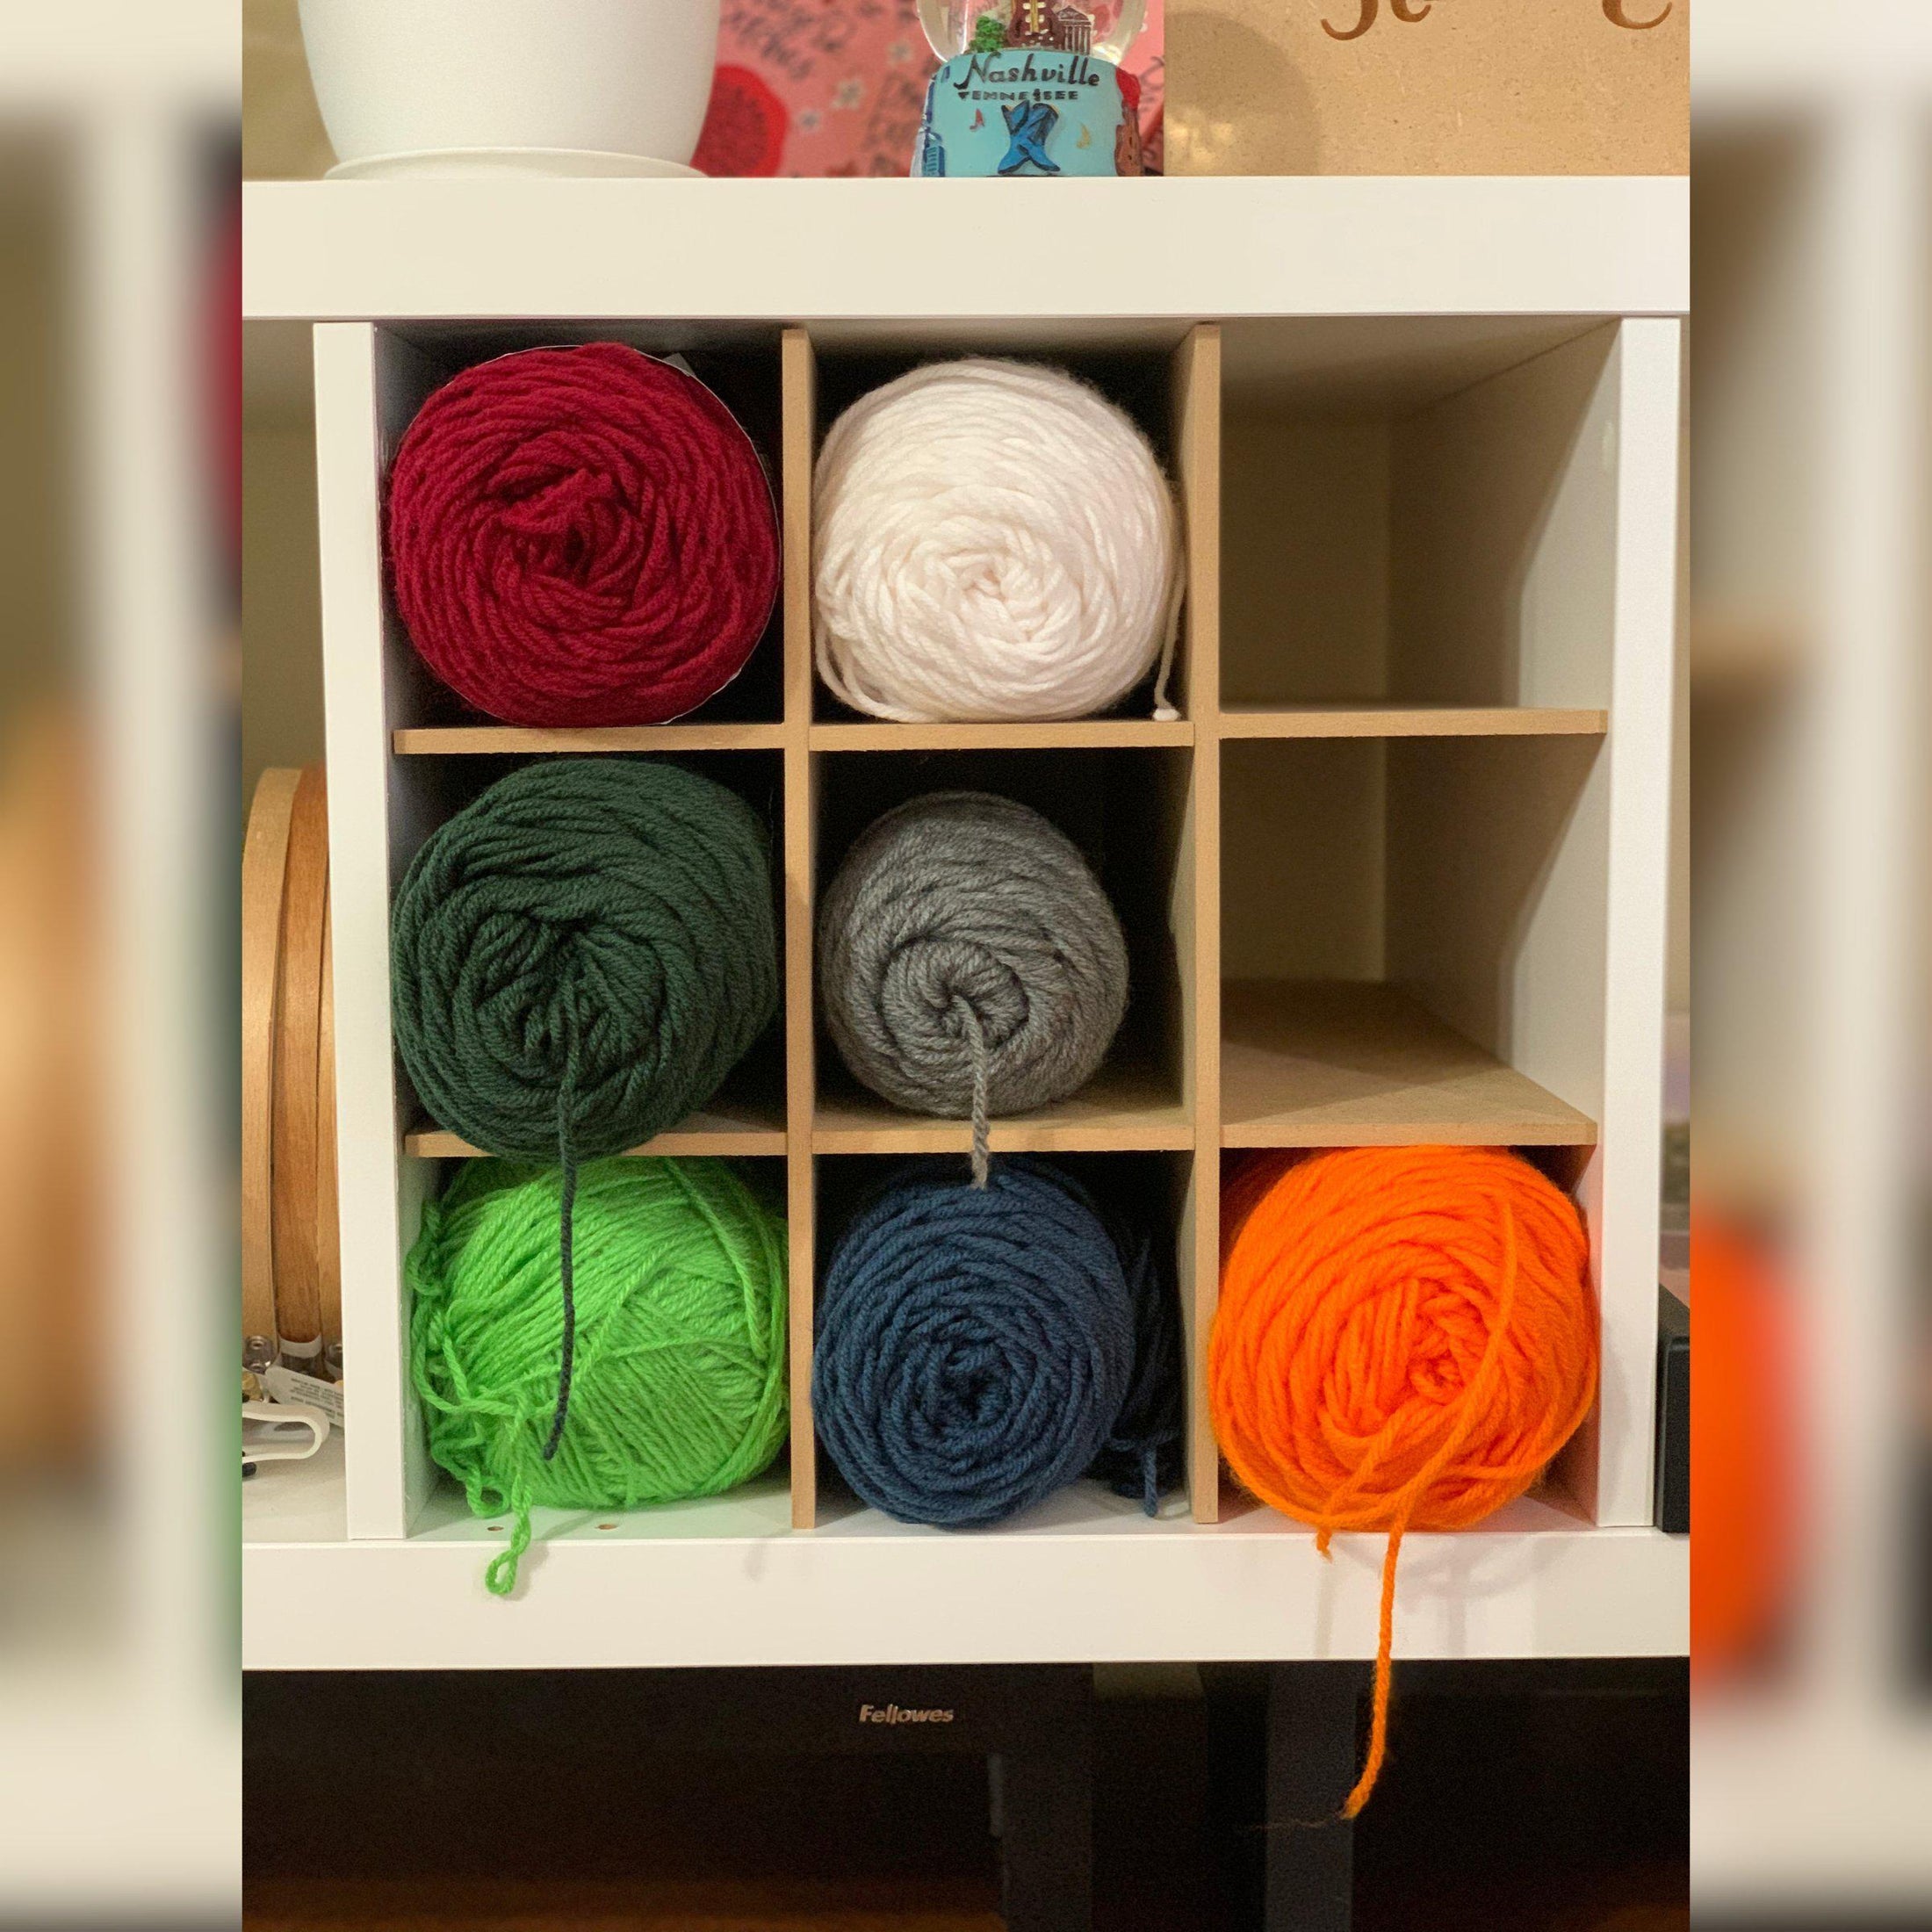 9 Cubby Cube Insert for Cube Storage Shelves storing yarn skeins-The Steady Hand